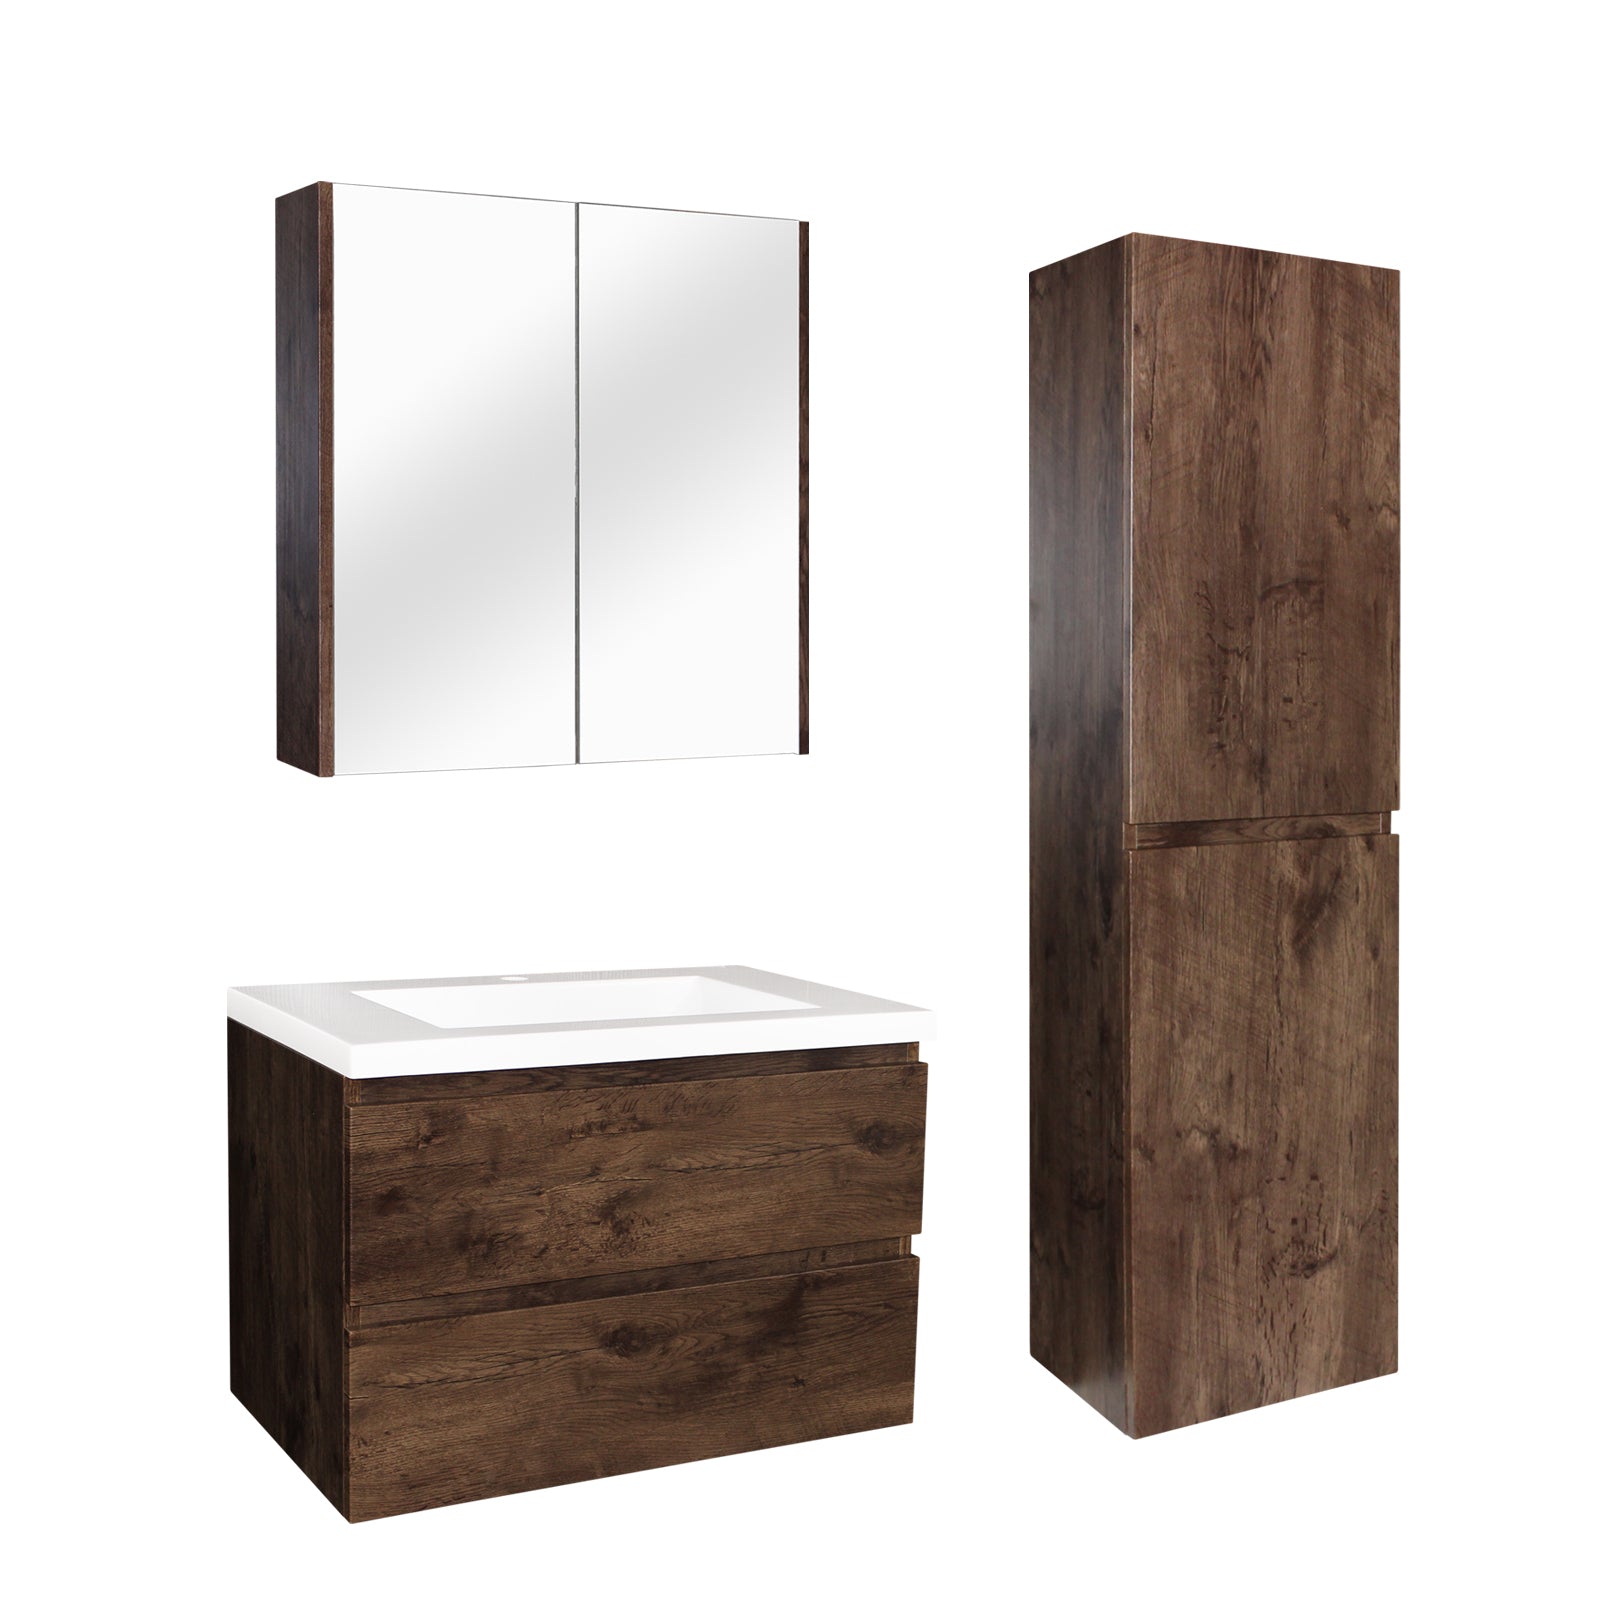 POSEIDON QUBIST DARK OAK MIRROR SHAVING CABINETS (AVAILABLE IN 600MM, 750MM AND 900MM)